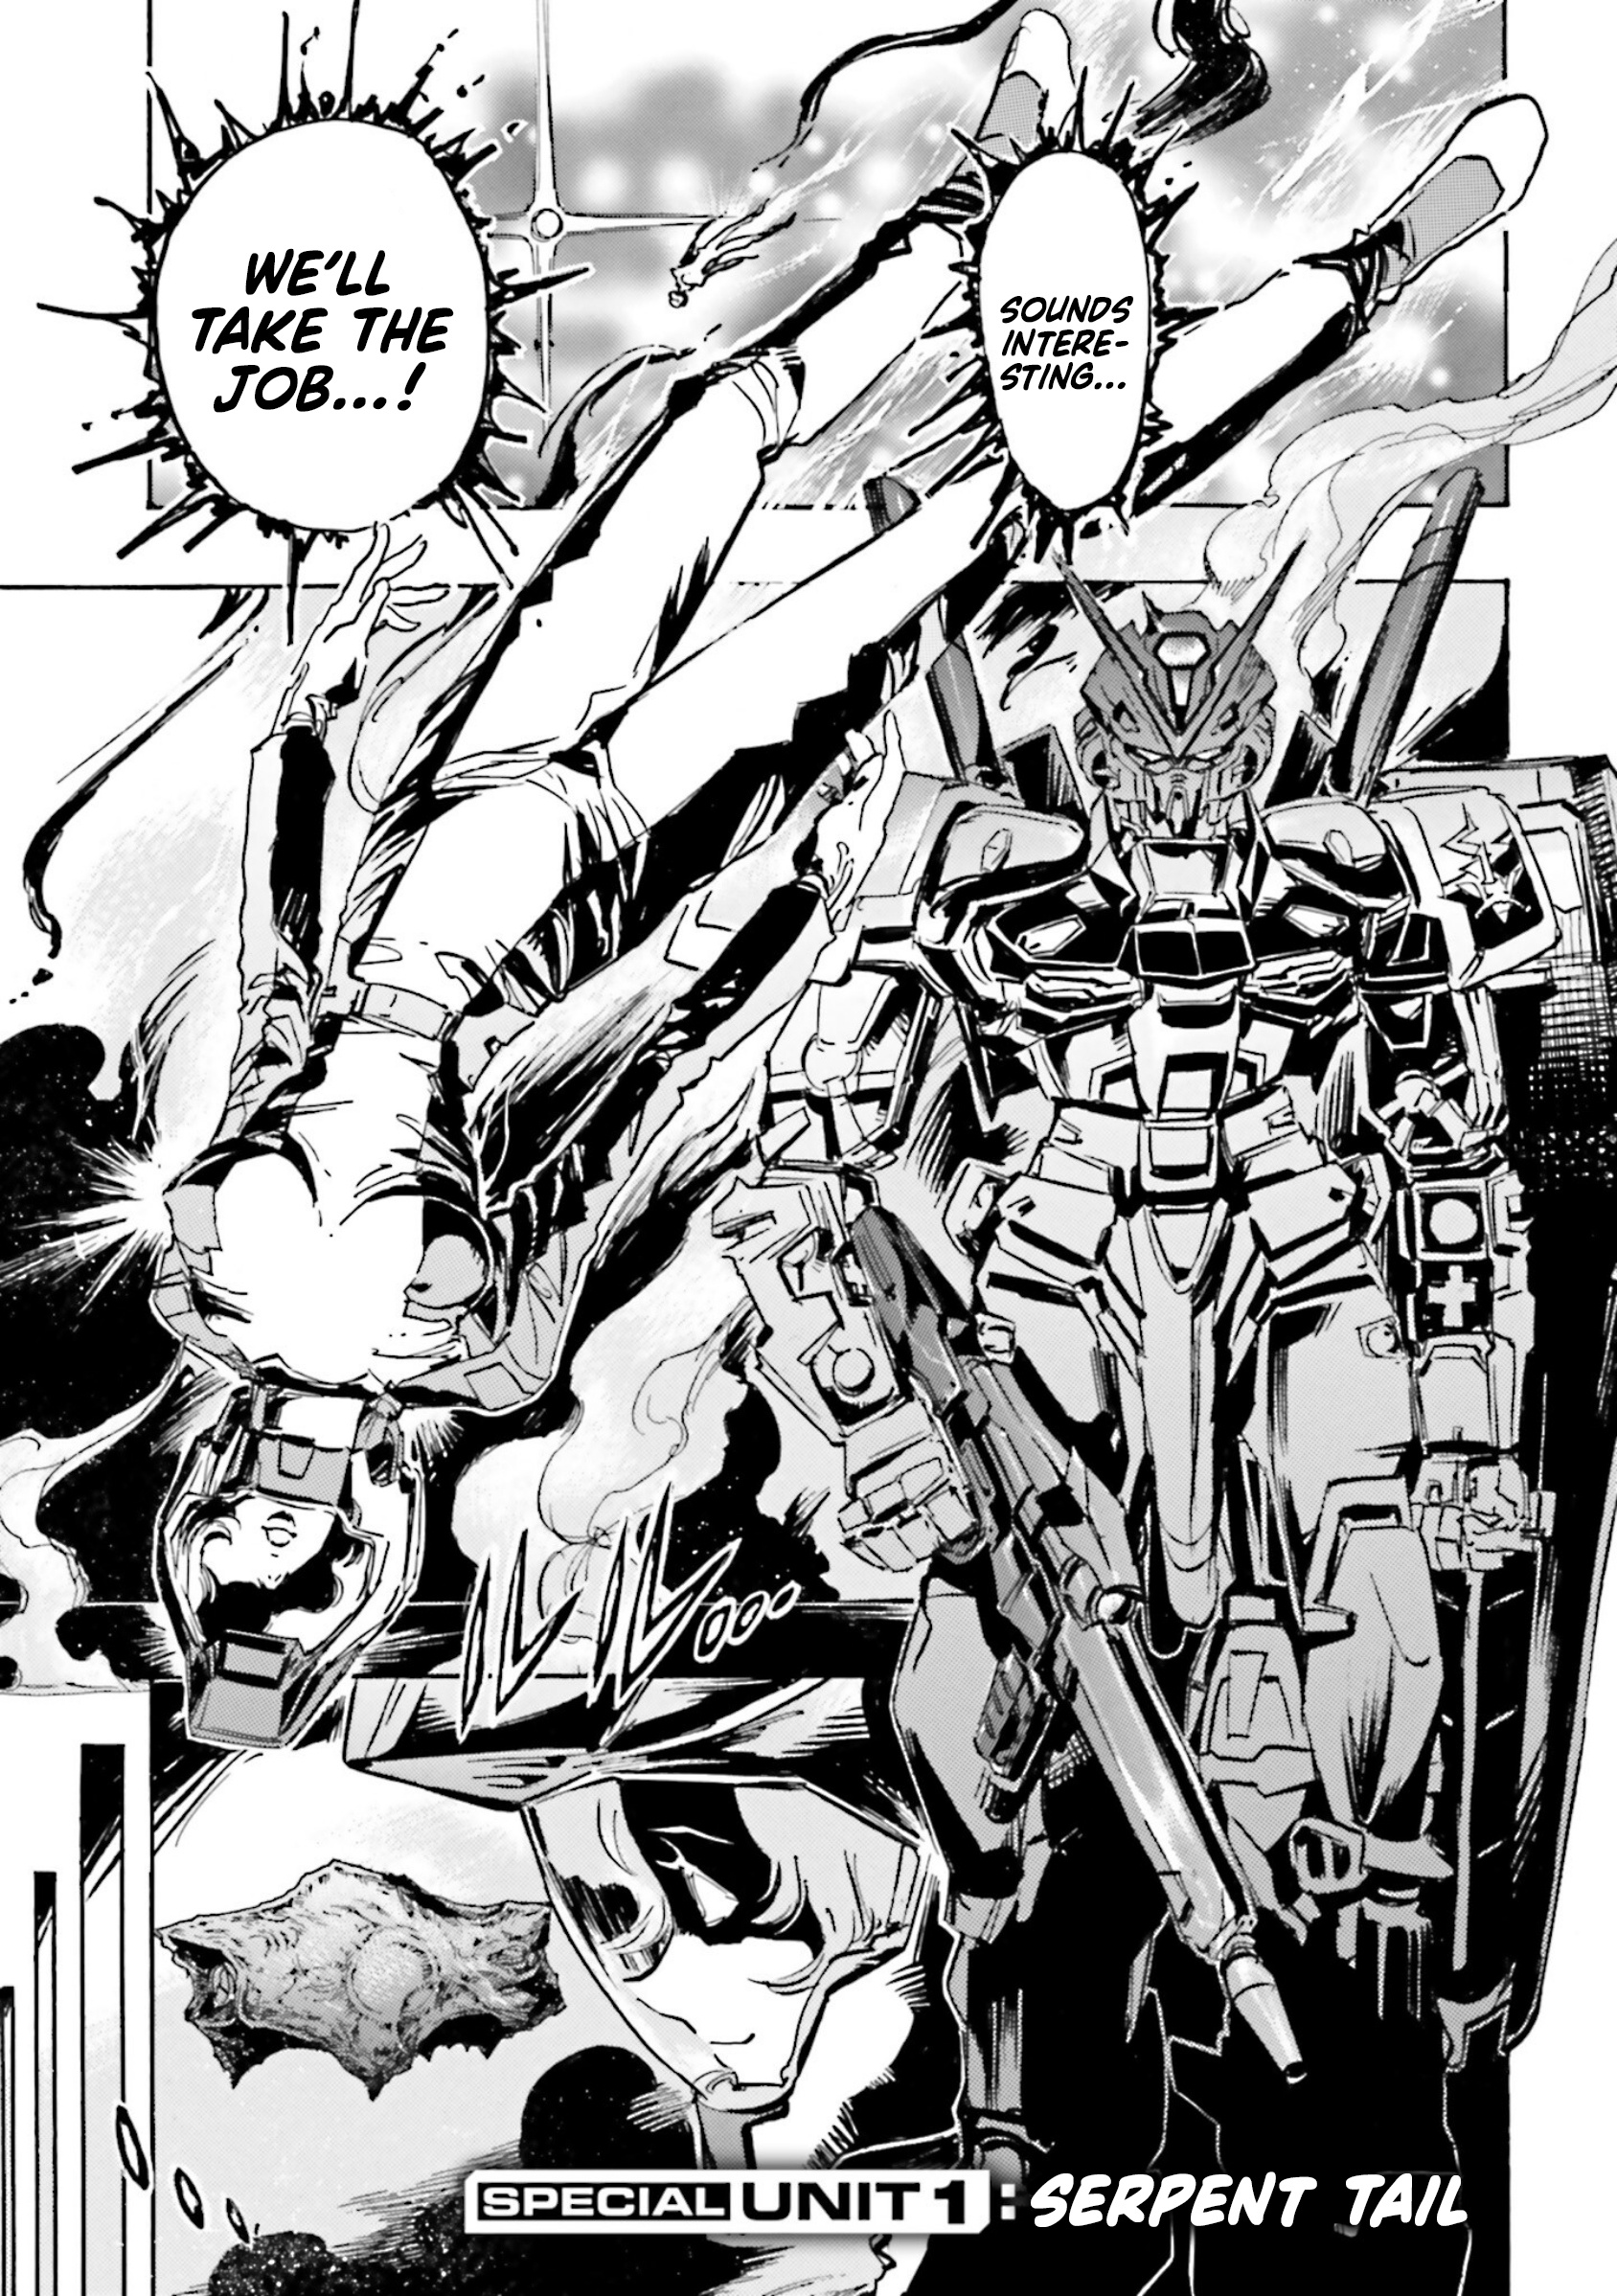 Mobile Suit Gundam Seed Astray R Vol.1 Chapter 4.5: Special Unit 1: Serpent Tail - Picture 1